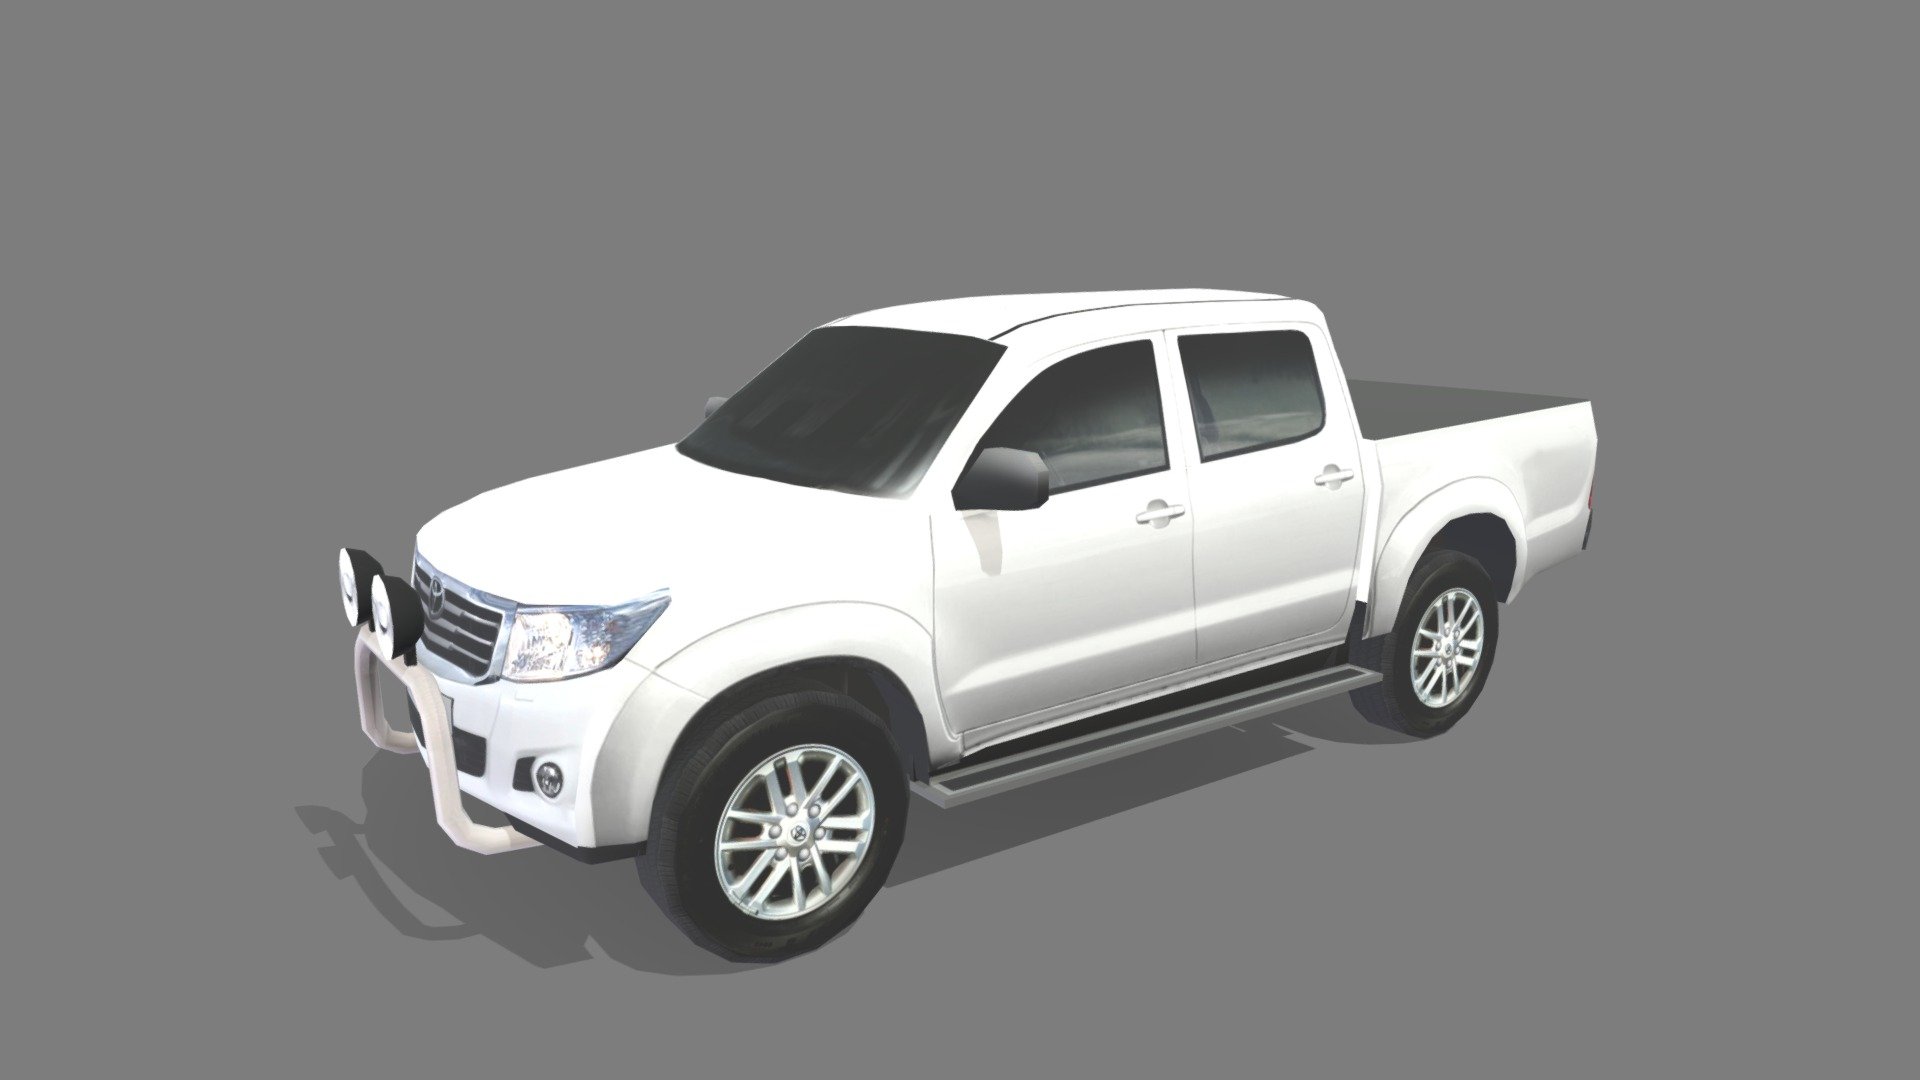 The Toyota Hilux (Japanese: トヨタ・ハイラックス, Hepburn: Toyota Hairakkusu), stylized as HiLux and historically as Hi-Lux, is a series of pickup trucks produced and marketed by the Japanese automobile manufacturer Toyota. The majority of these vehicles are sold as pickup truck or cab chassis variants, although they could be configured in a variety of body styles.

static, non rigged, Lowpoly mesh, blank layered 2048 psd template layered texture, for Games, VR, MSFS or XPlane Scenery Airport development , standard materials, not a detailed interior, just enough to be seen as part of enviroment on airfields or airports

thanks for looking! dont forget to check my other models&hellip; - Toyota Hilux 2014 Static parking lot Low Poly - Buy Royalty Free 3D model by Hangarcerouno 3d model